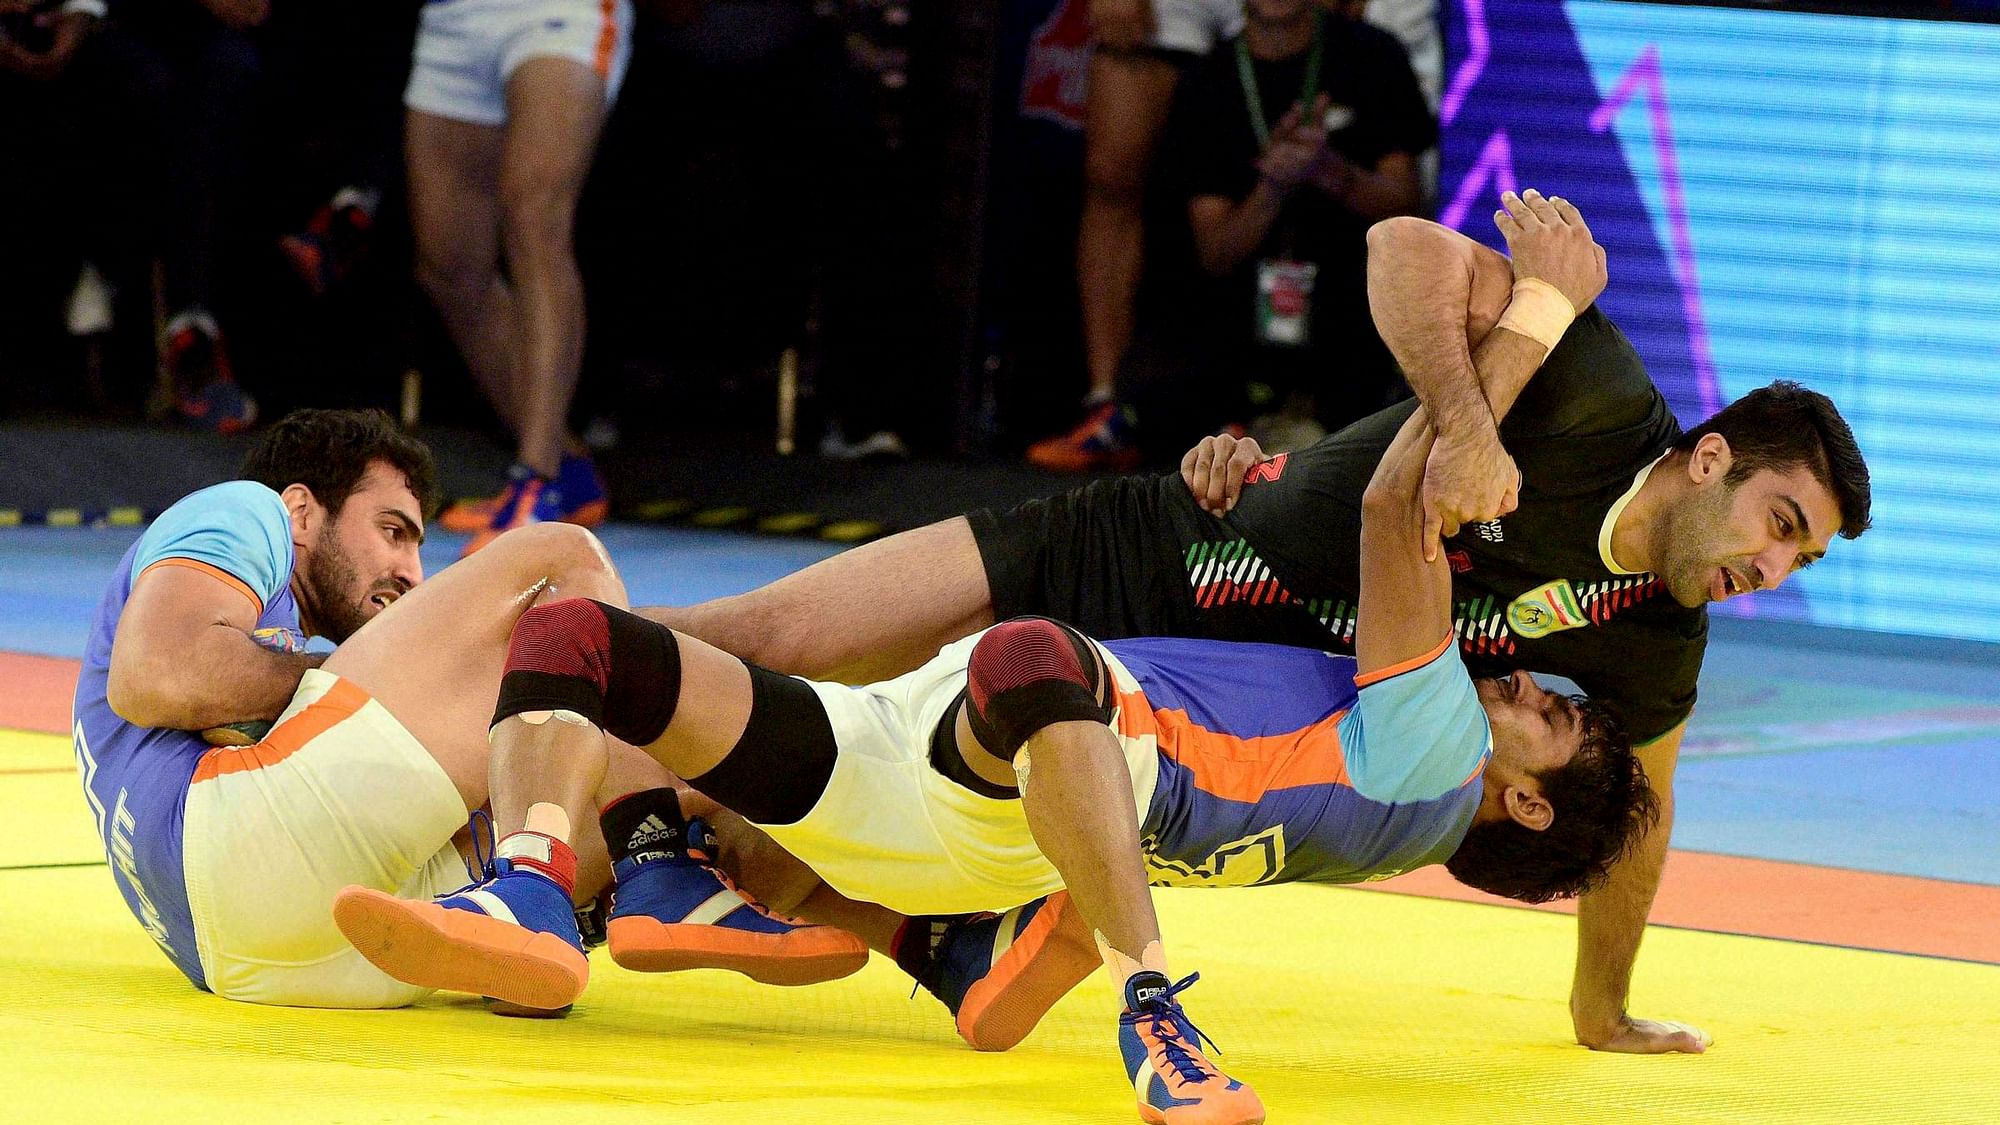 Indian players successfully got 2 points for a “Super Tackle against Iran during the final match of Kabaddi World Cup 2016 in Ahmedabad on Saturday. (Photo: PTI)